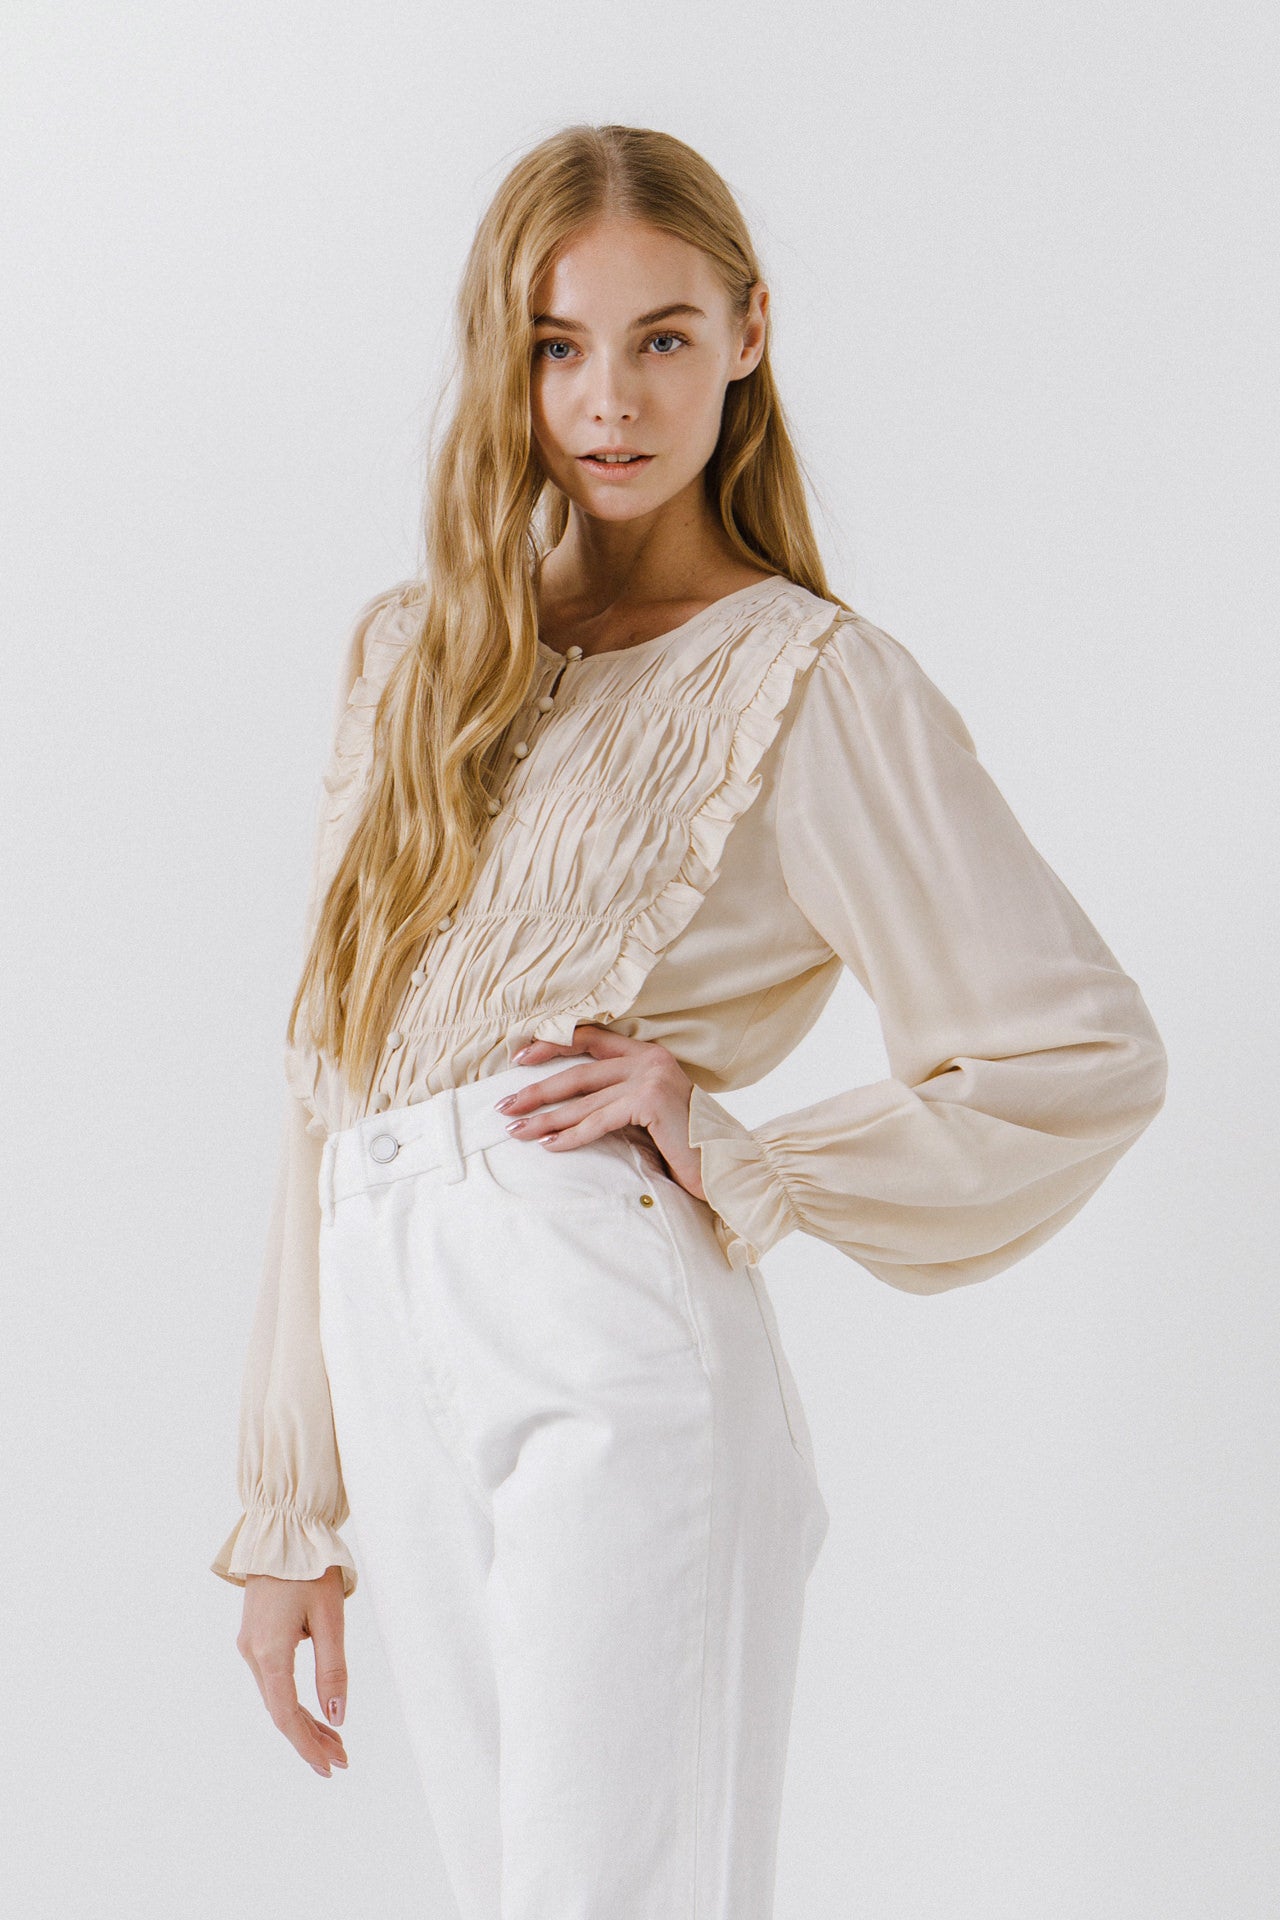 FREE THE ROSES - Ruching Detail Blouse - SHIRTS & BLOUSES available at Objectrare